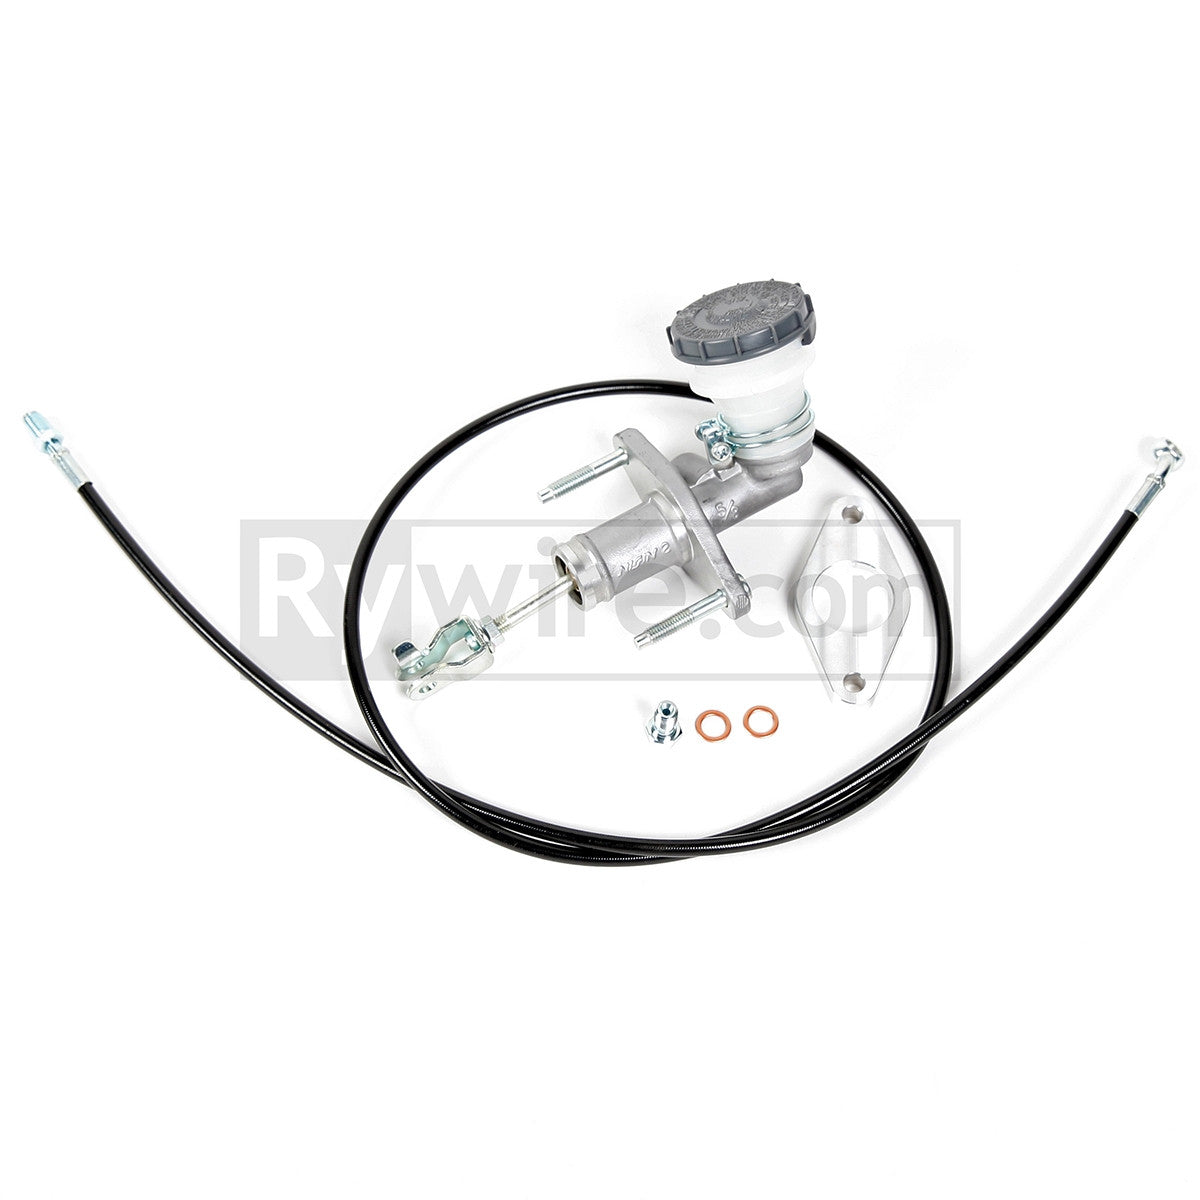 Rywire S2000 Clutch Master Cylinder Kit